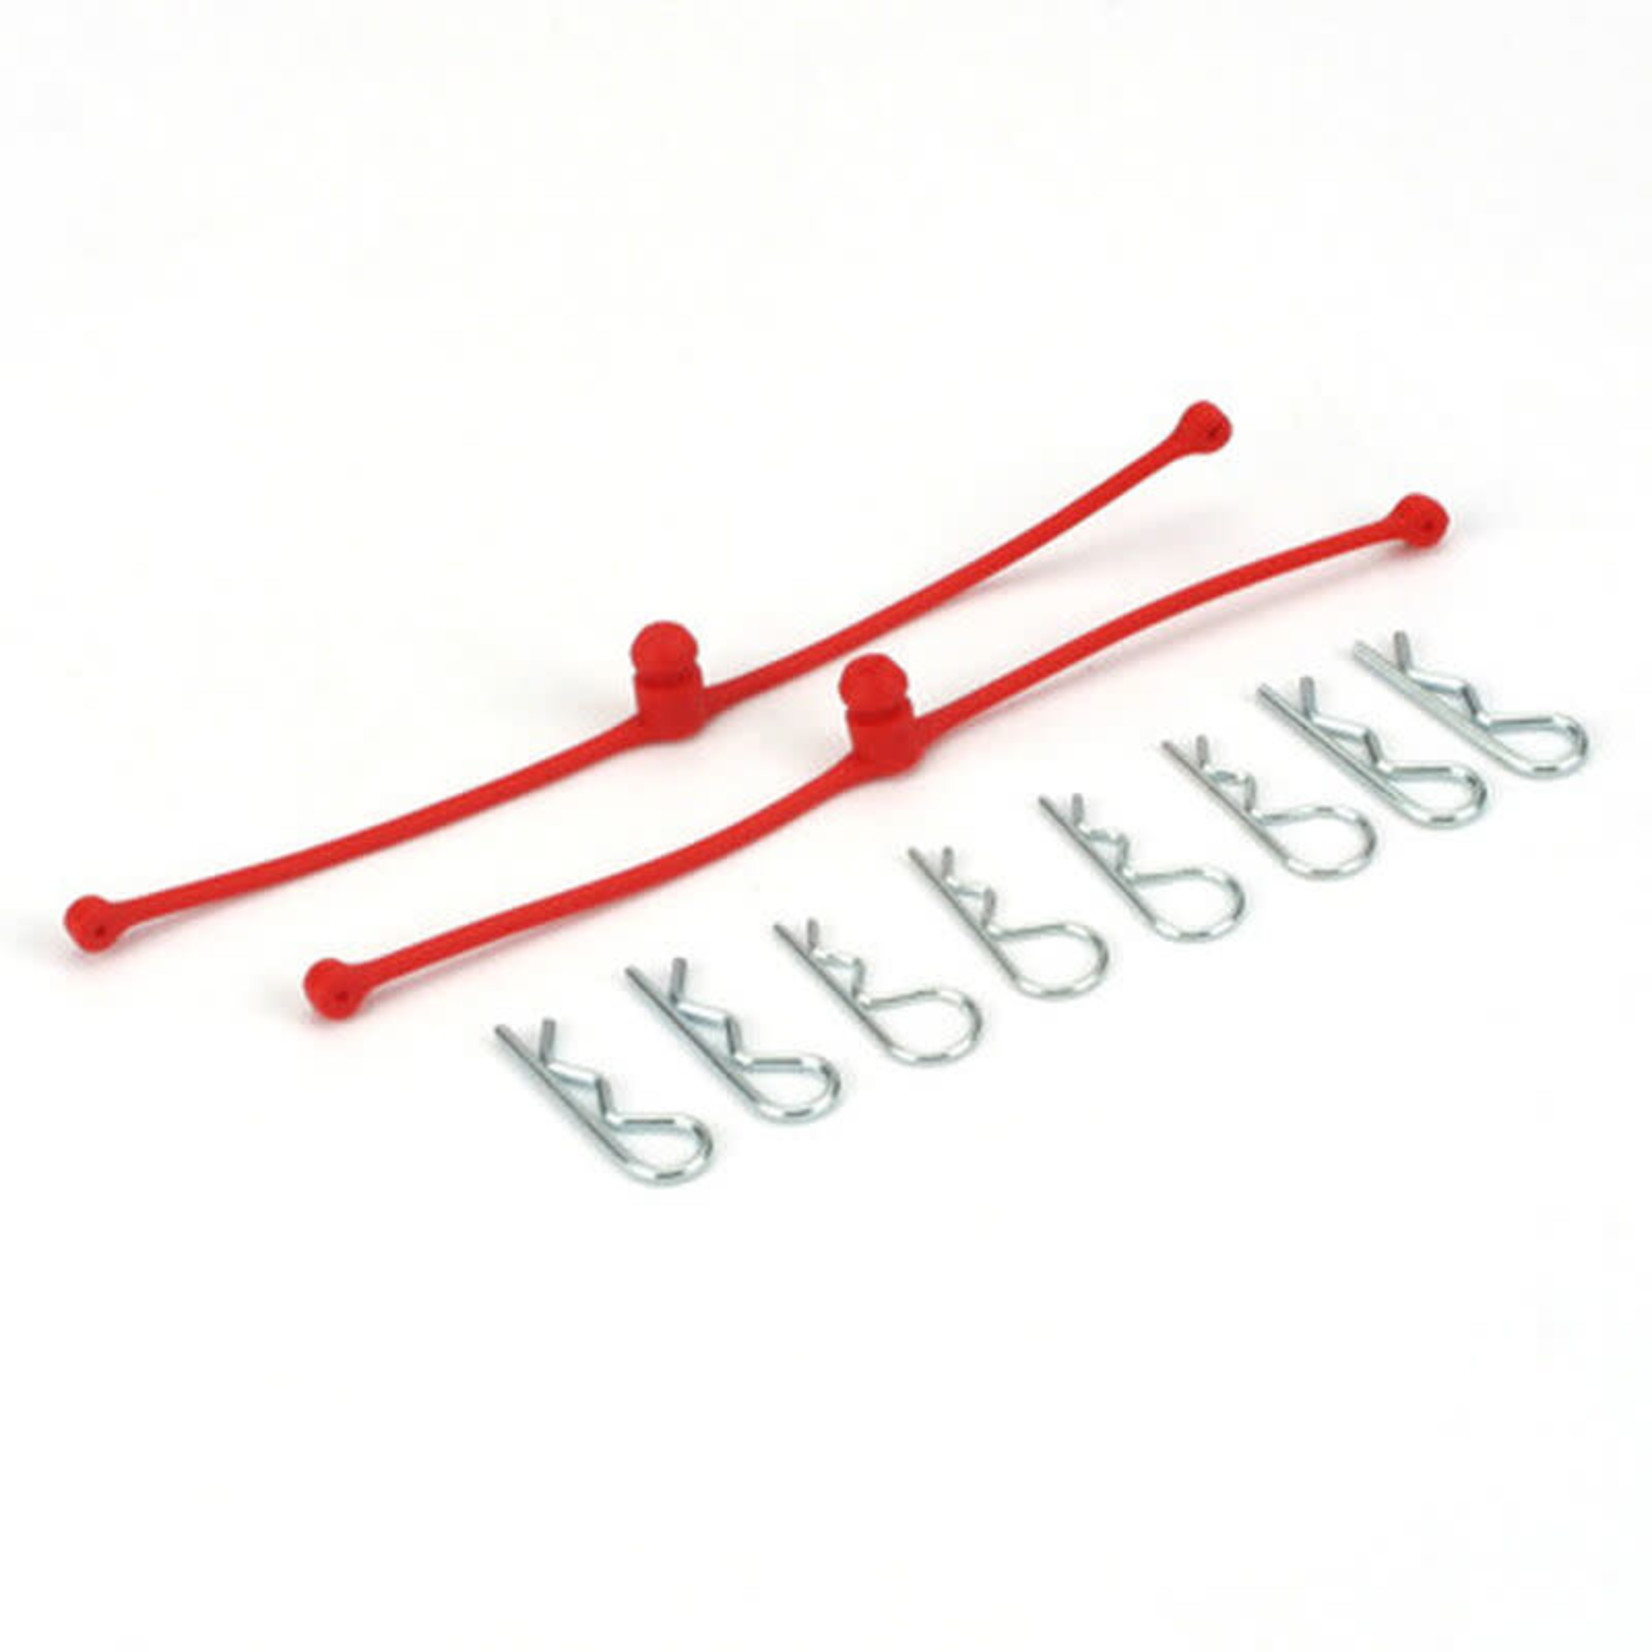 DuBro DUB2248 DuBro Body Klip Retainers, Red (2)